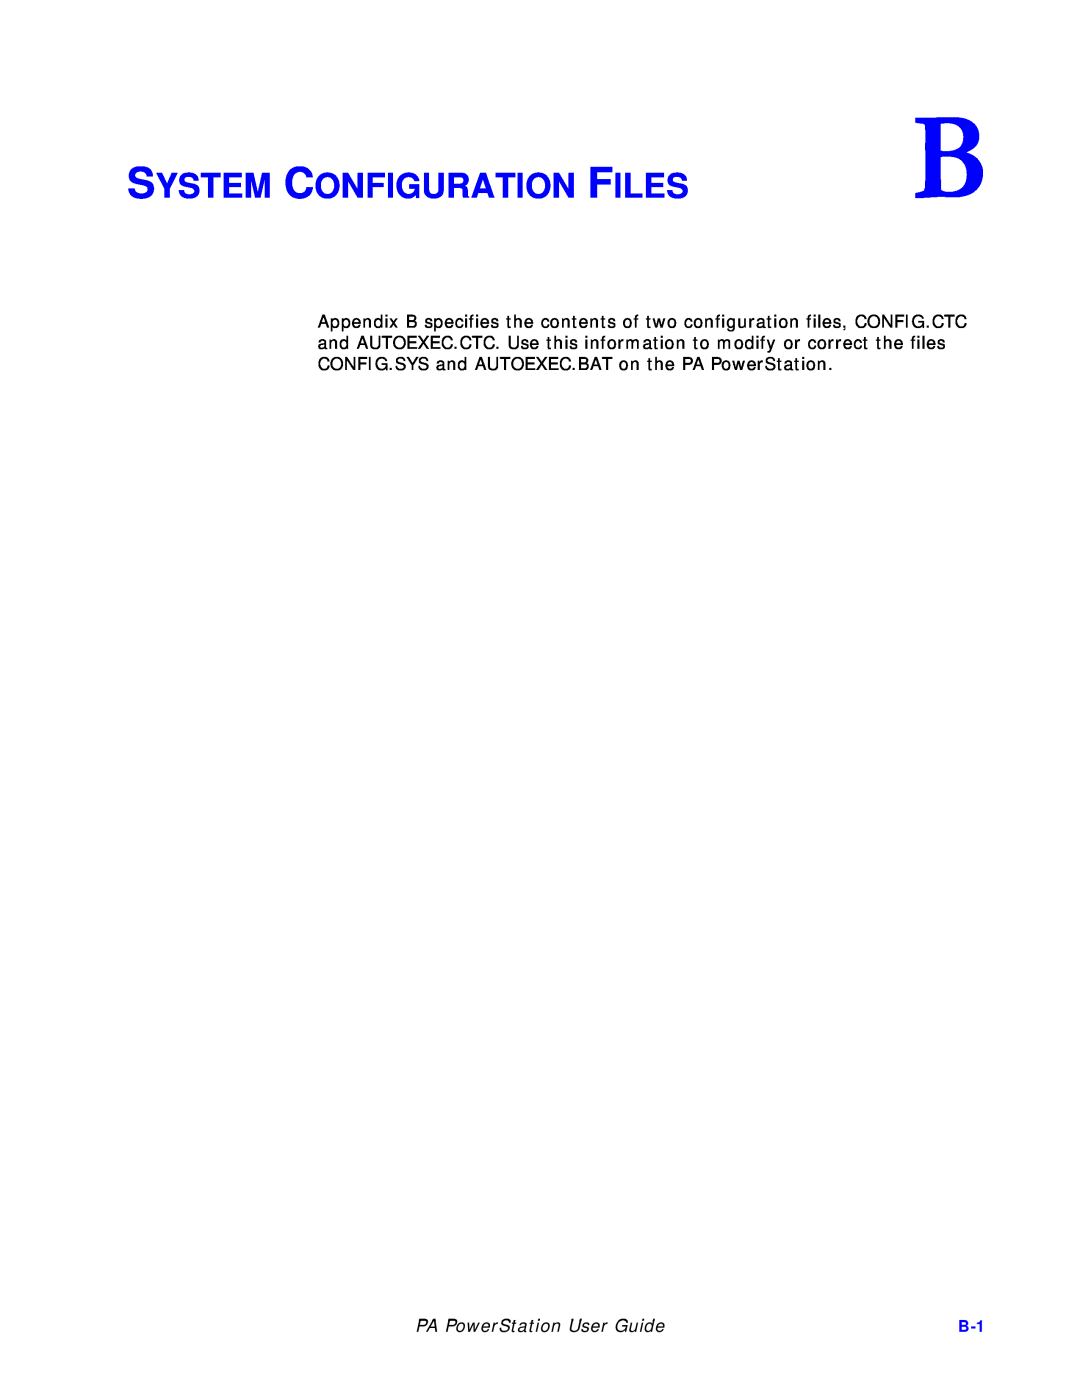 Parker Hannifin PA Series manual System Configuration Files, PA PowerStation User Guide 